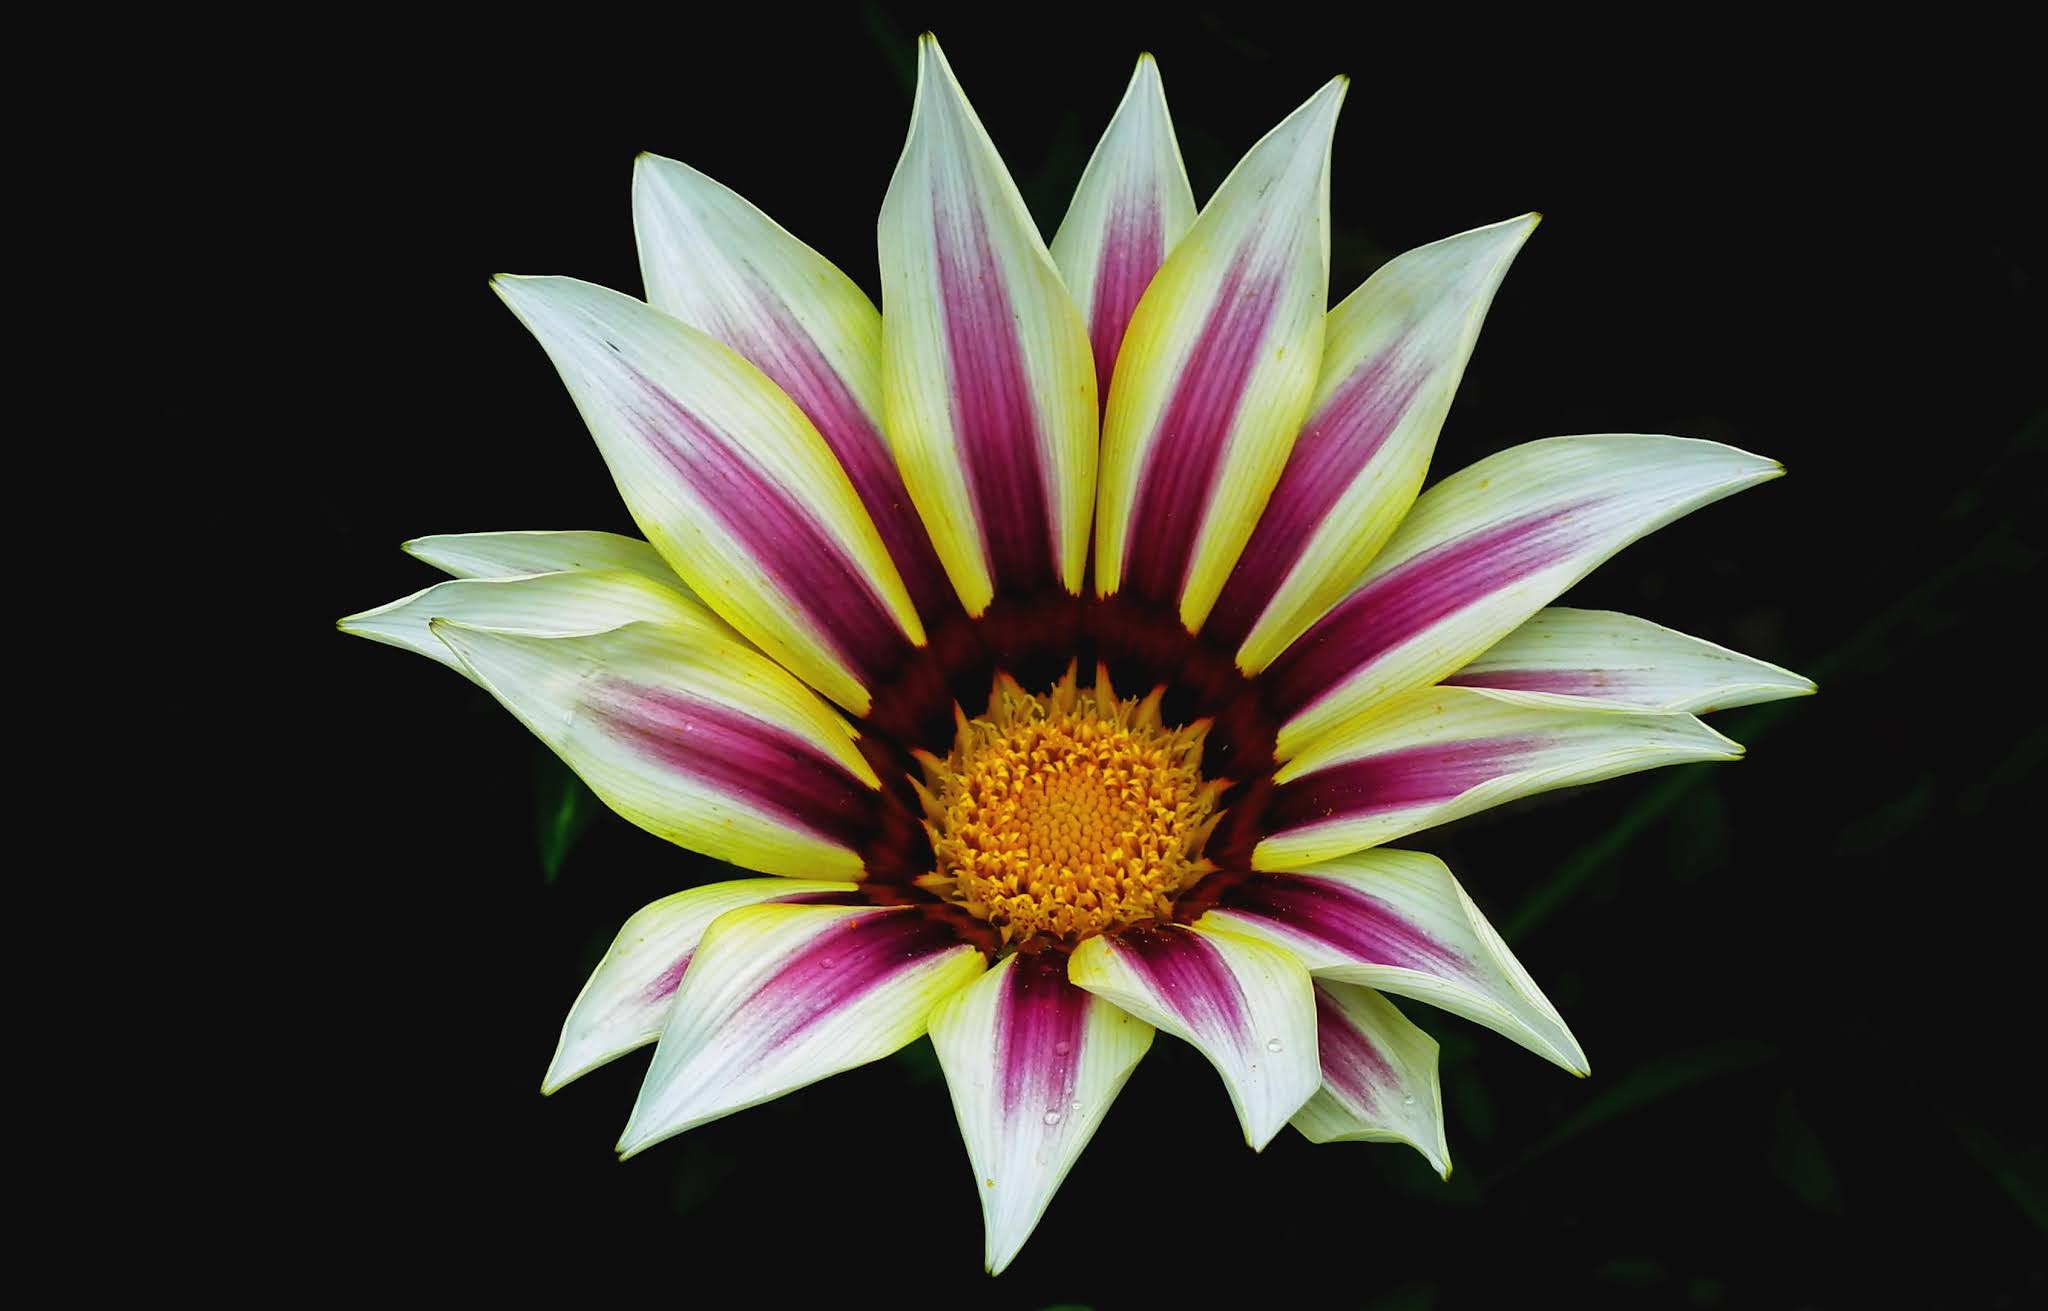 Gazania Flower: A Flower That Opens Only With The Sun